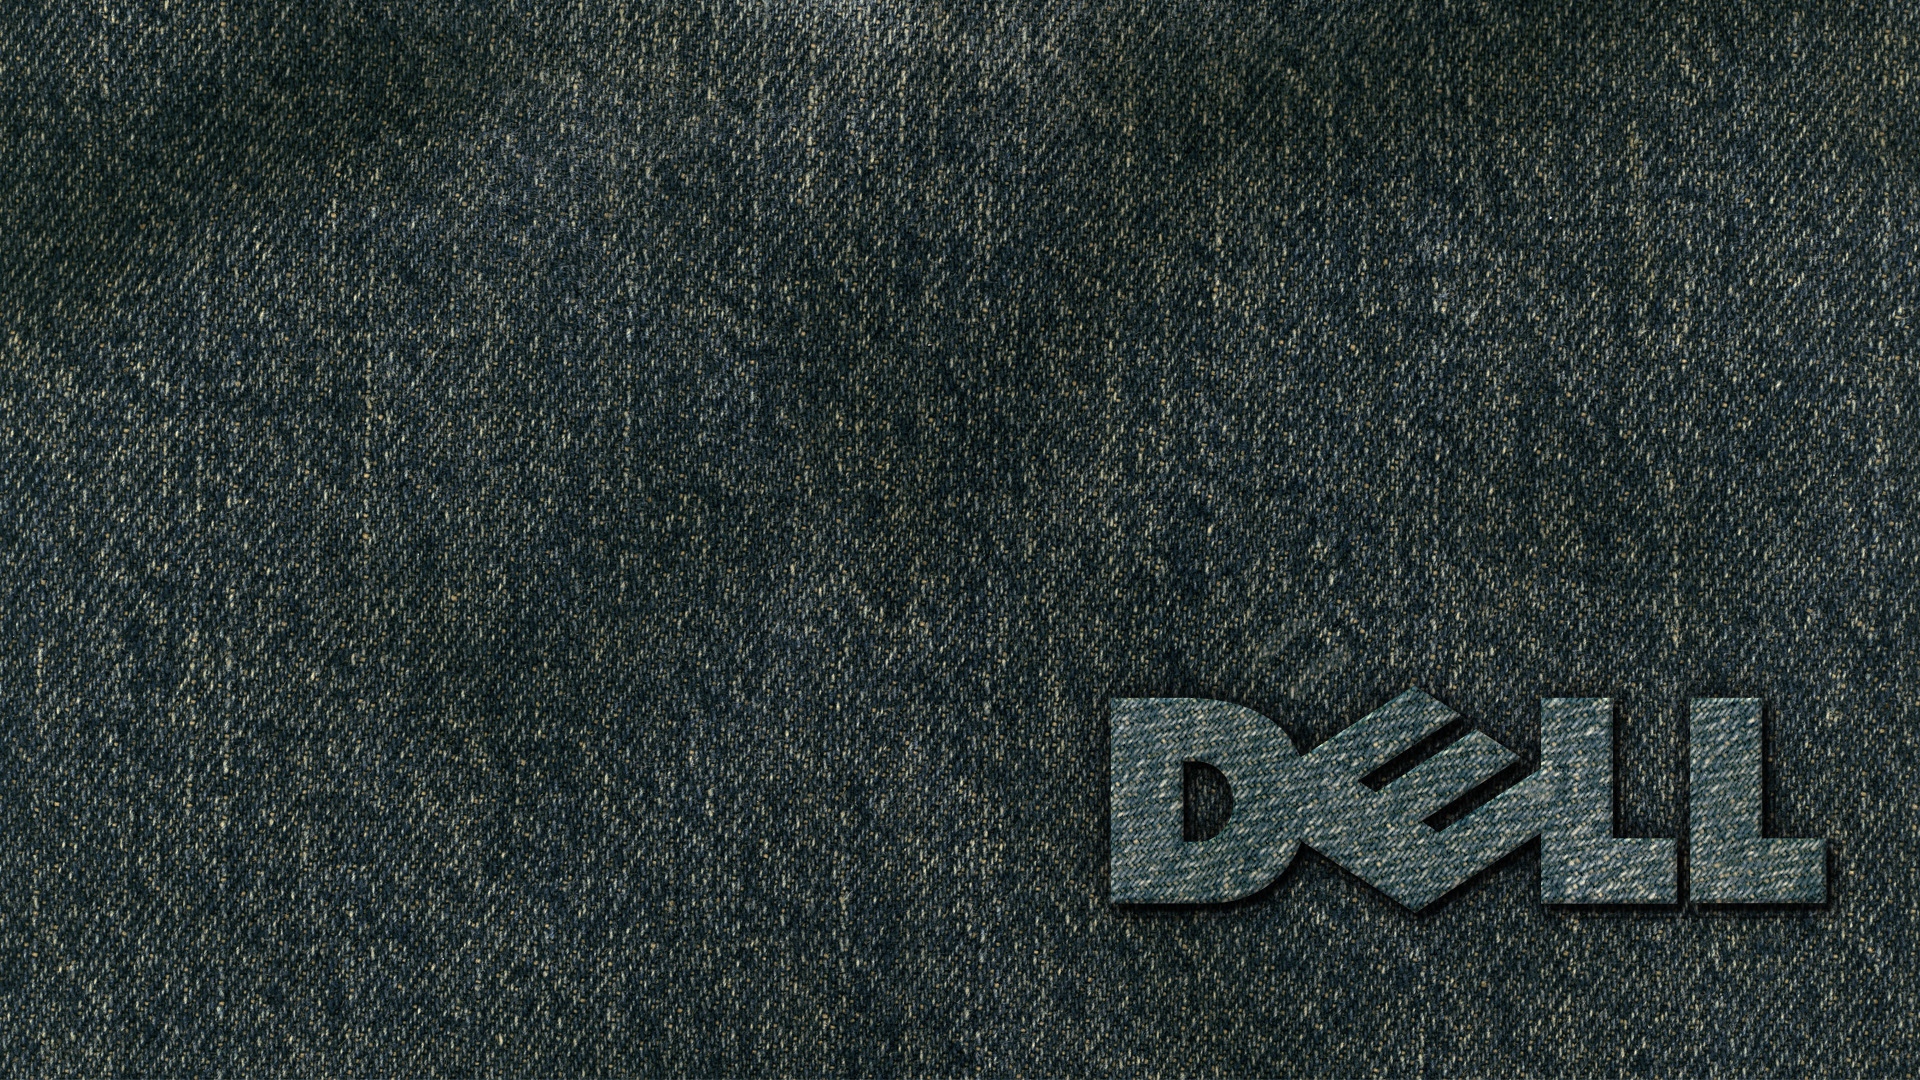 Dell Wallpaper For Free Download